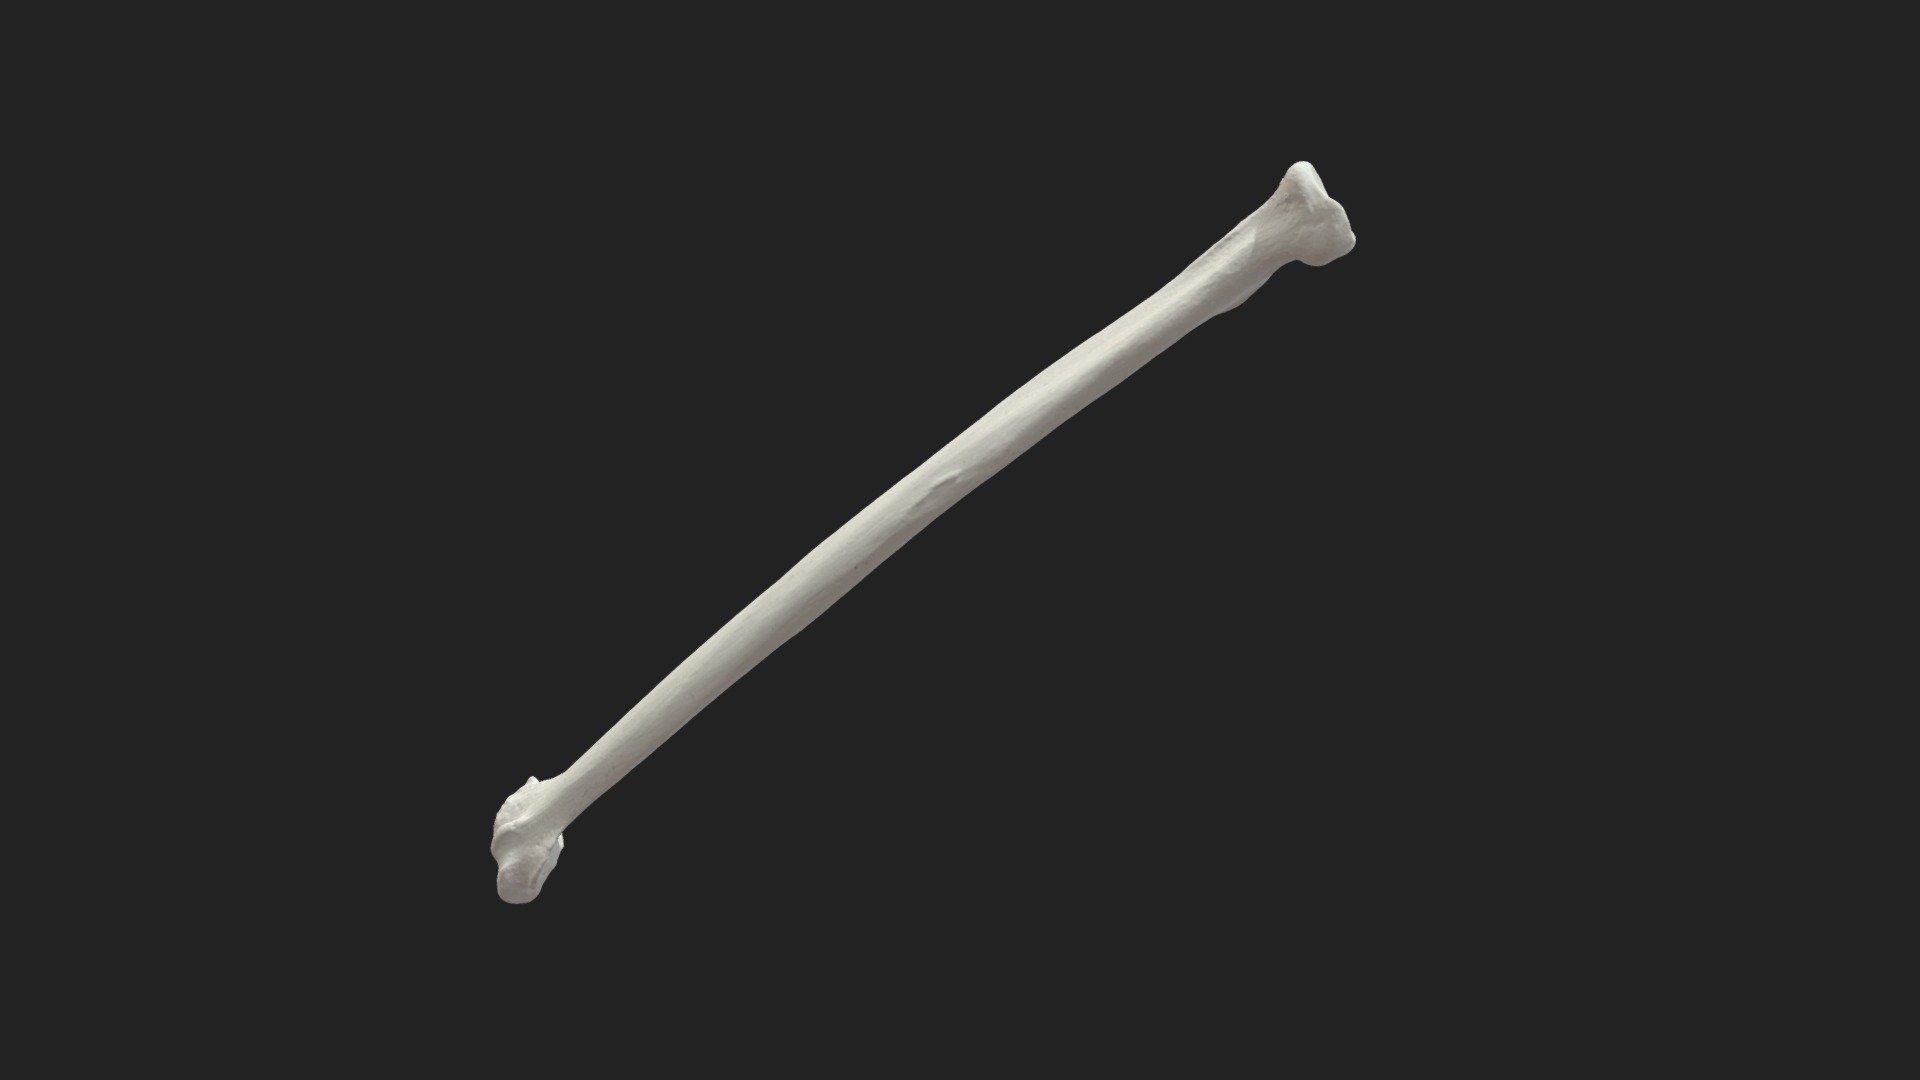 right radial bone (radius) of a cat

size of the specimen: 103 x 5.5 x 4 mm

3D scanning performed with the structured light scanner “Artec Micro” - radial bone (radius) cat - 3D model by vetanatMunich 3d model